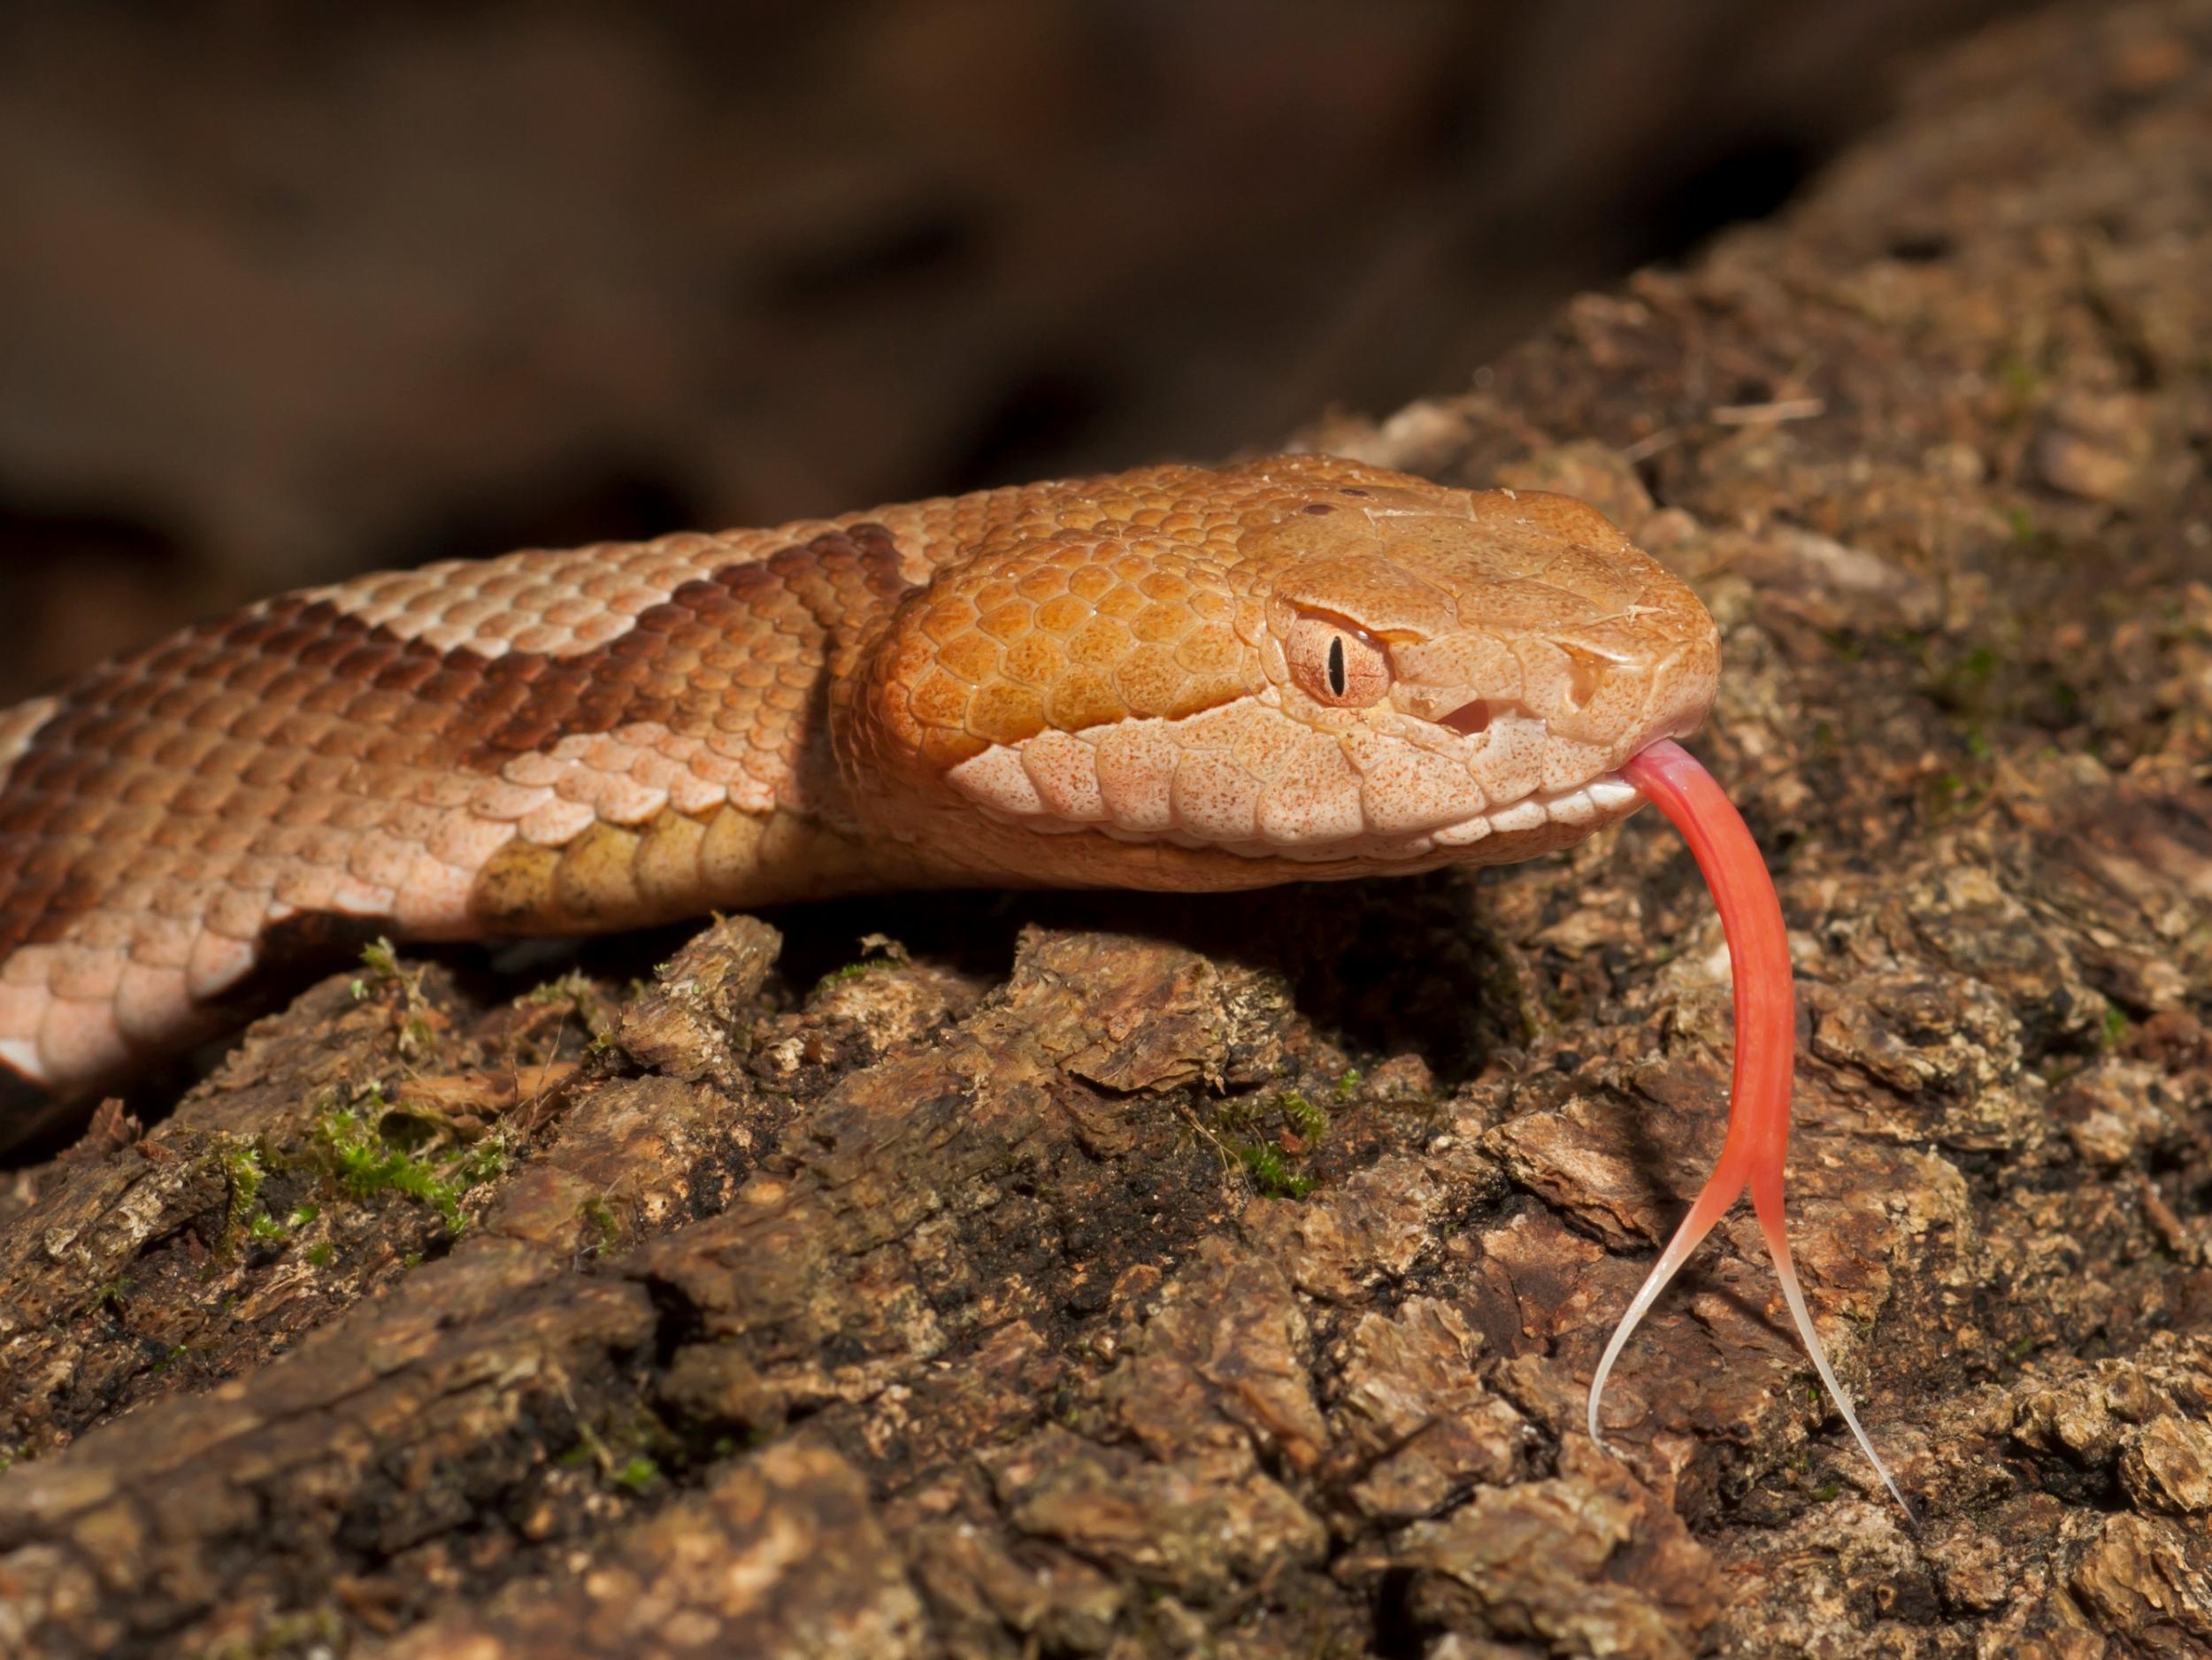 Oakley was believed to have been been bitten by a venomous copperhead pit viper